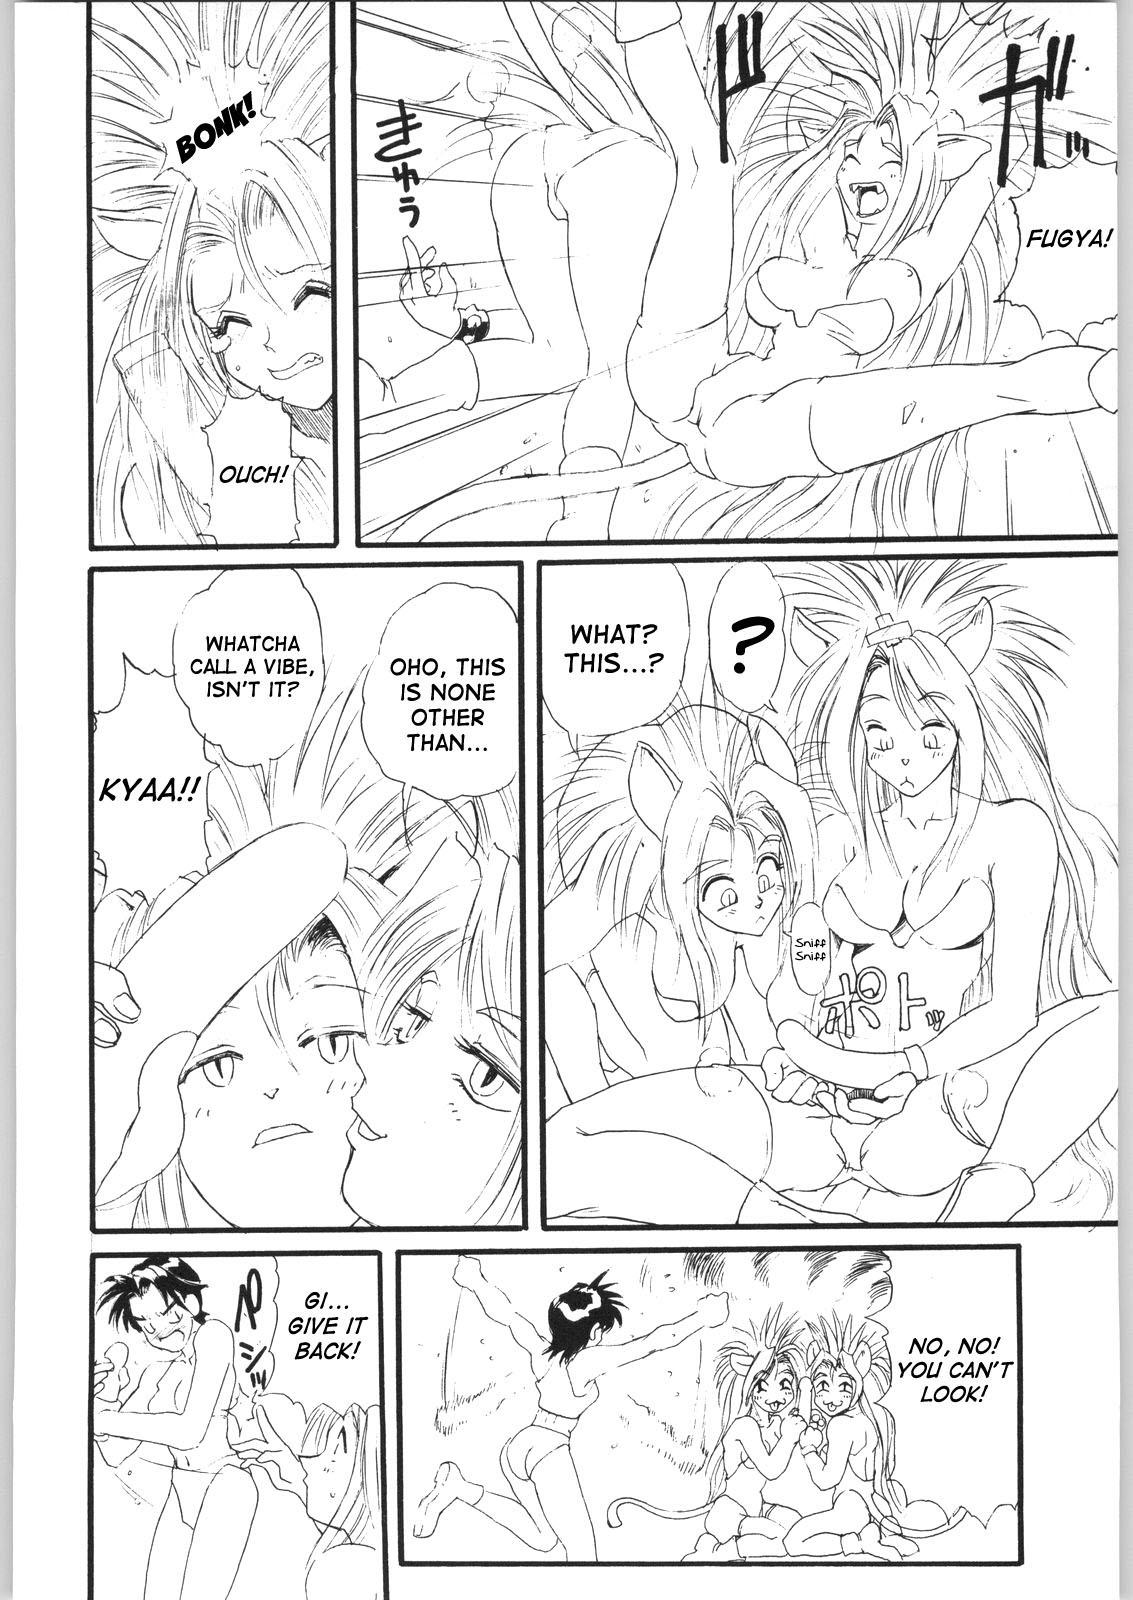 Caught Close Up Gendai: Remedial Leona - Dominion tank police Flogging - Page 5